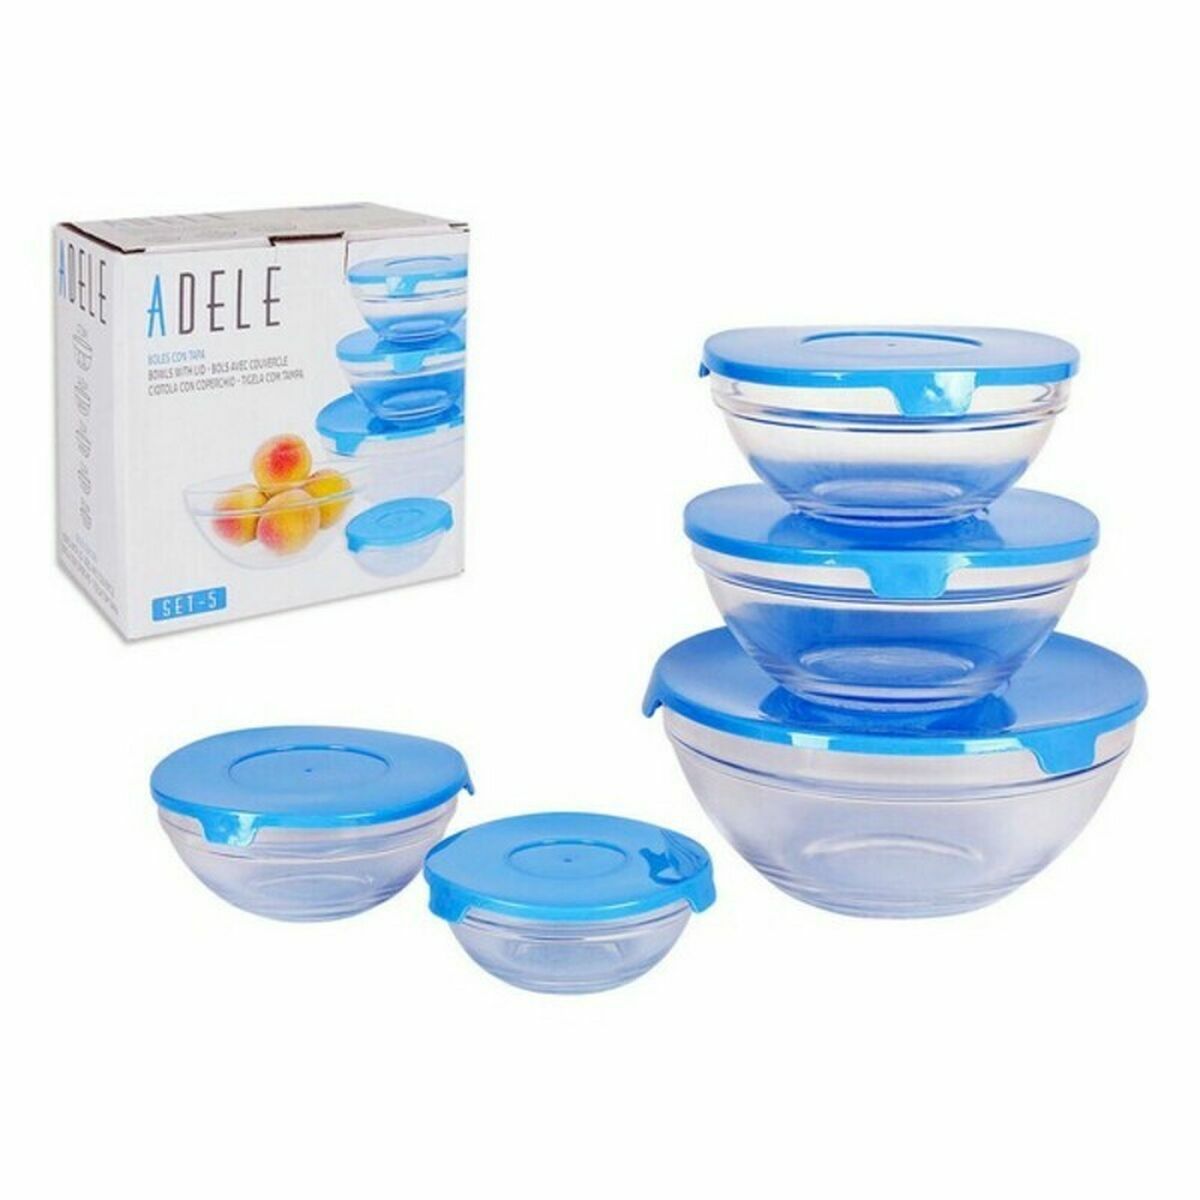 Bowl Adele With lid Stackable 5 Pieces Blue 17 (12 Units)